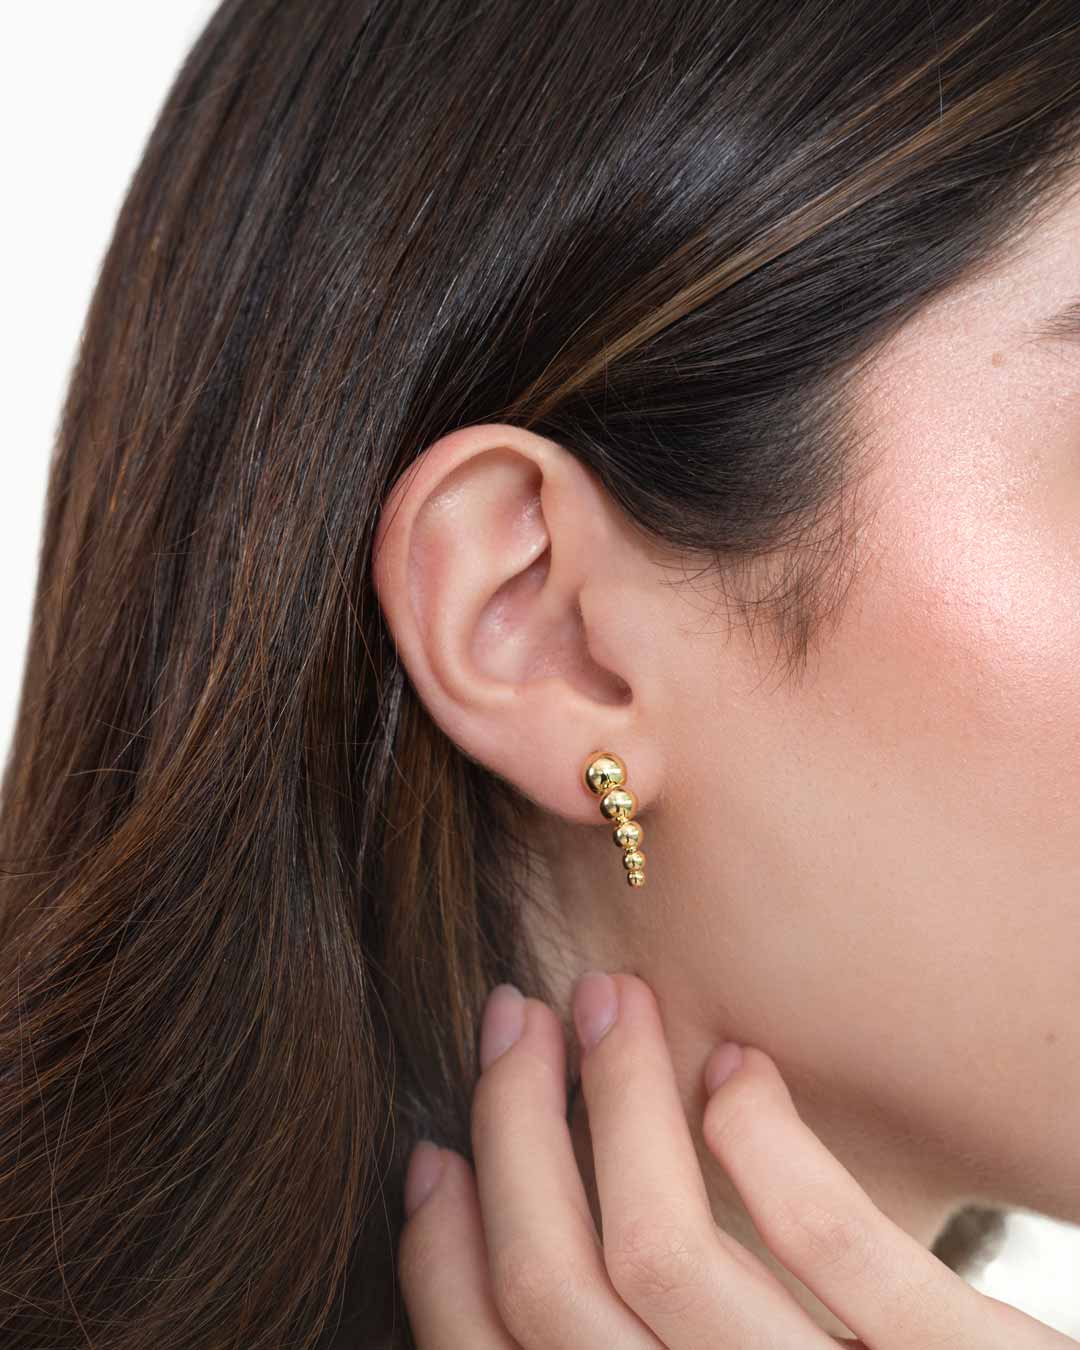 925 SILVER GOLD PLATED DESCENDING MULTI BALL CURVED EARRING